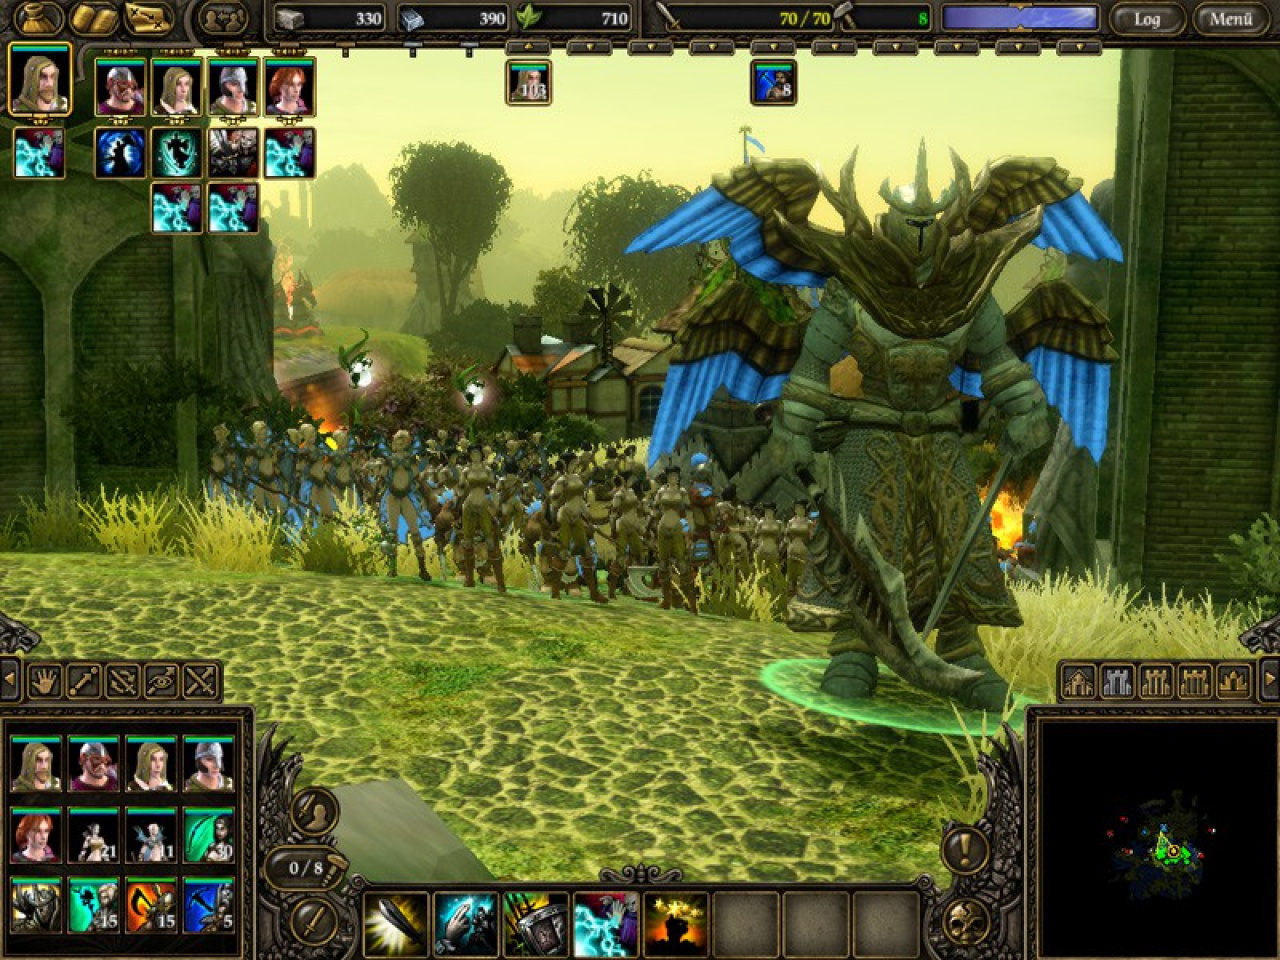 Images - SpellForce 2: Shadow Wars - Mod DB